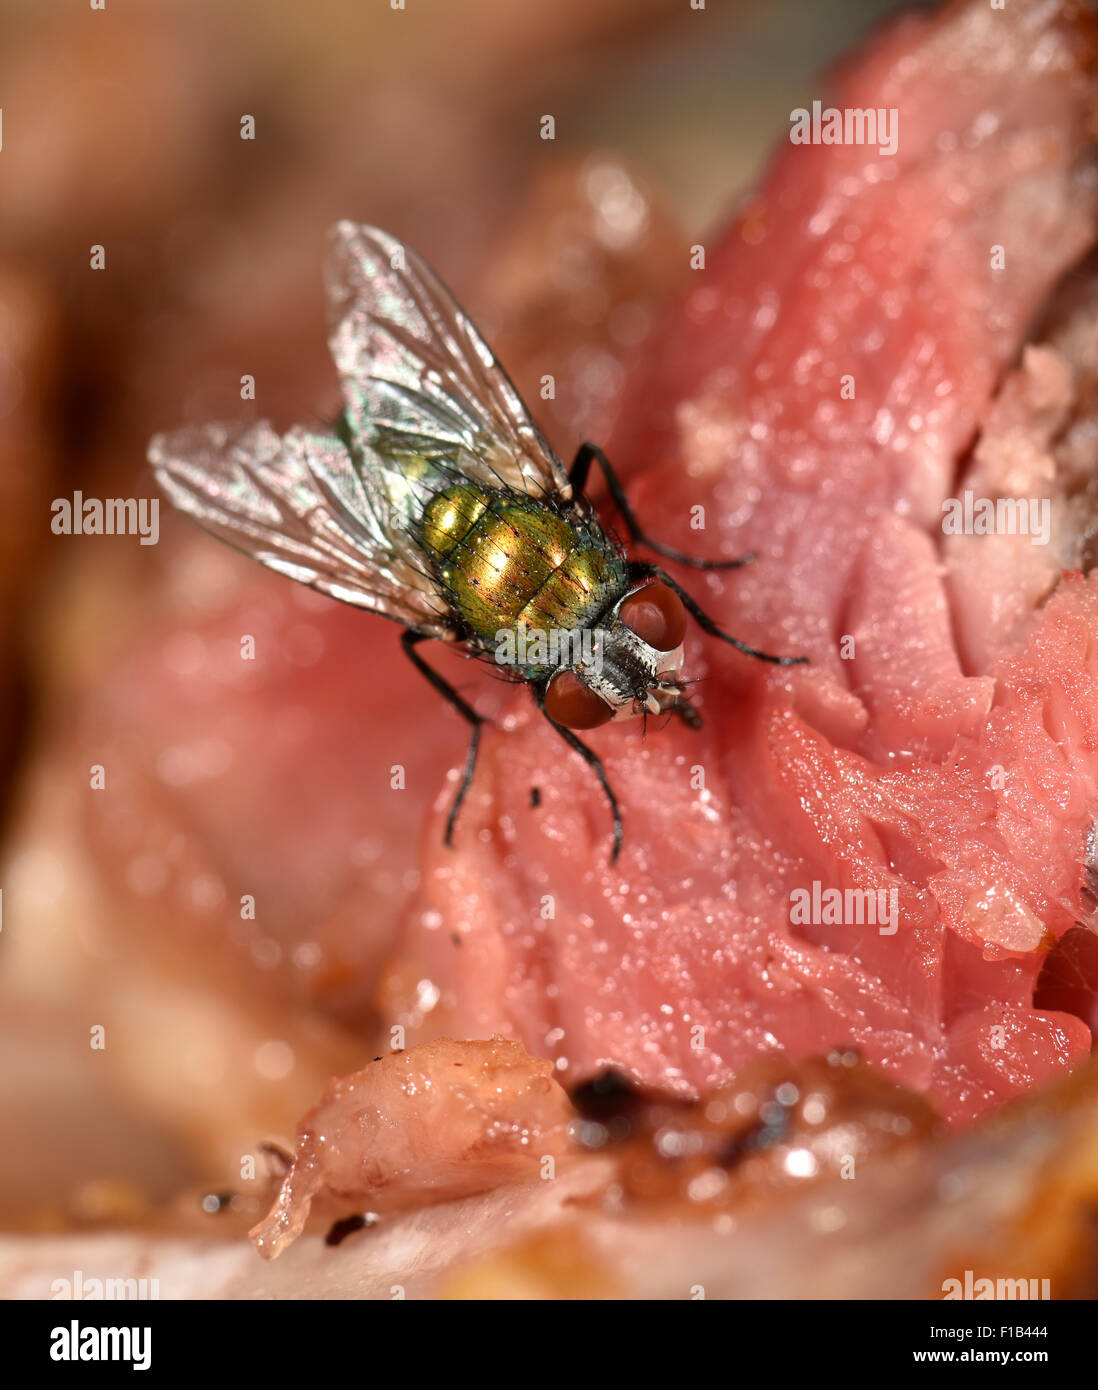 Common greenbottle (Lucilia caesar) fly, also blowfly, sitting on meat Stock Photo